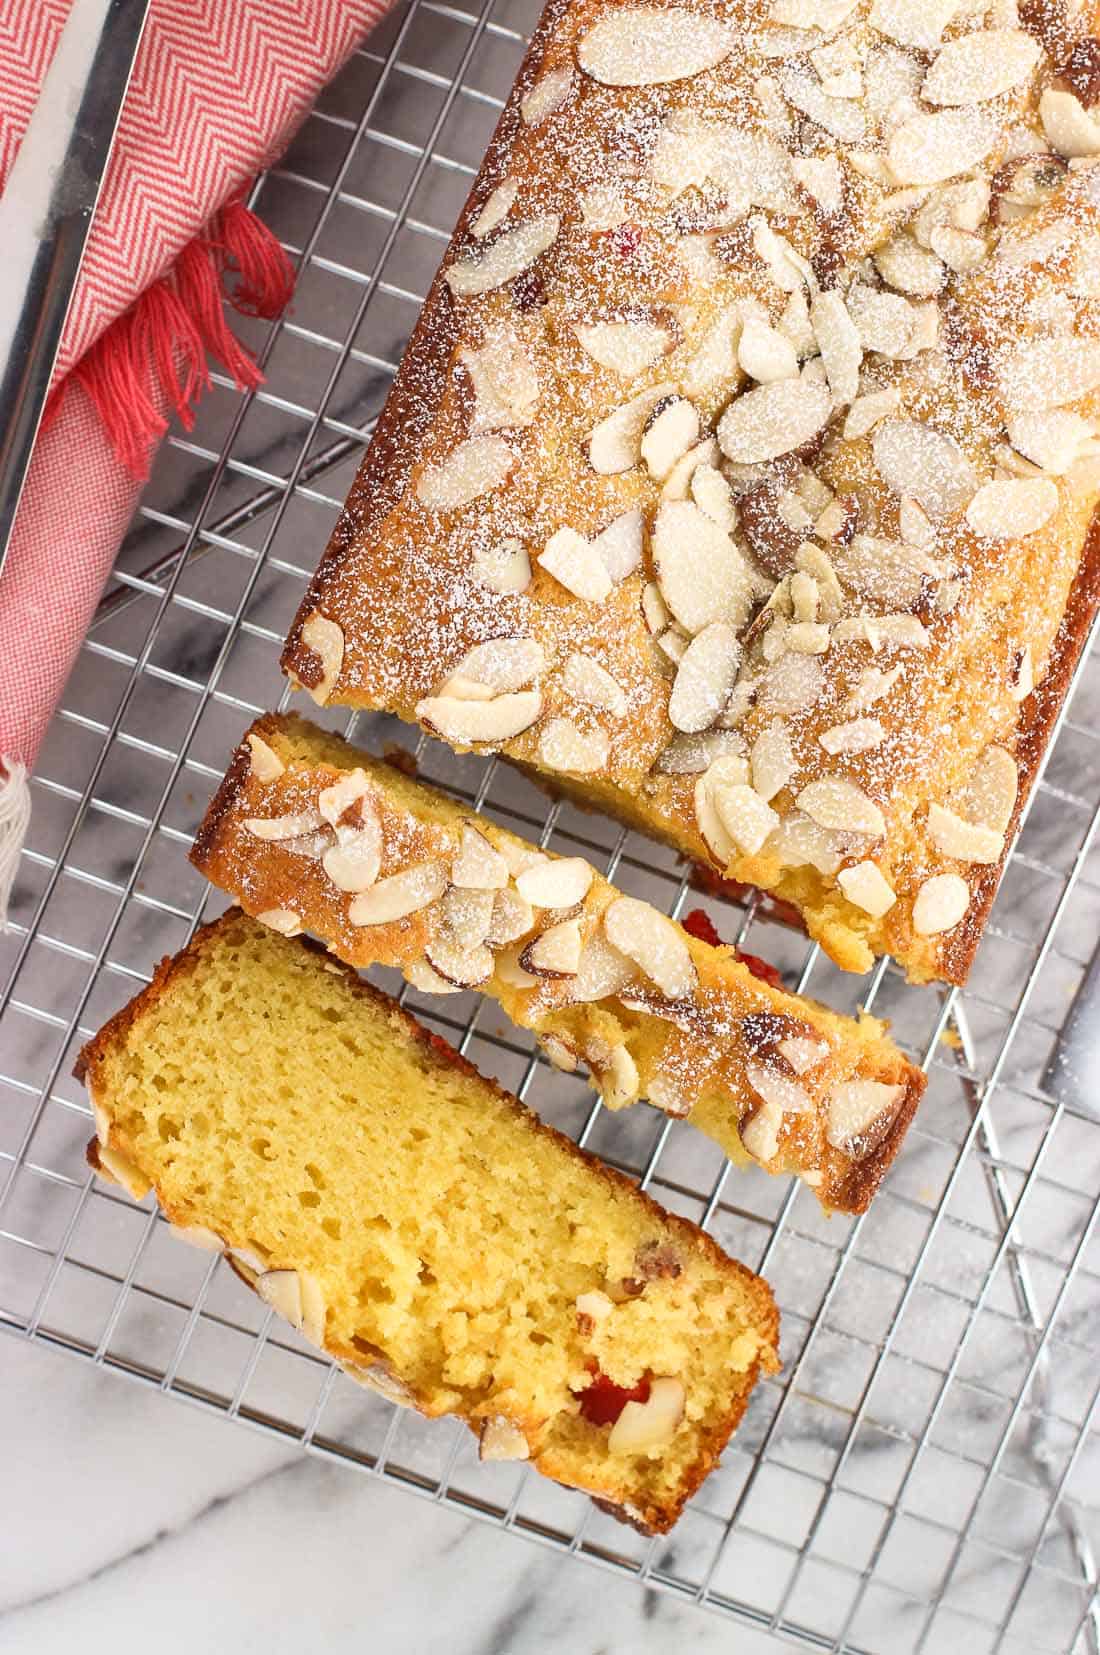 An overhead look of sliced cherry almond loaf cake on a wire rack